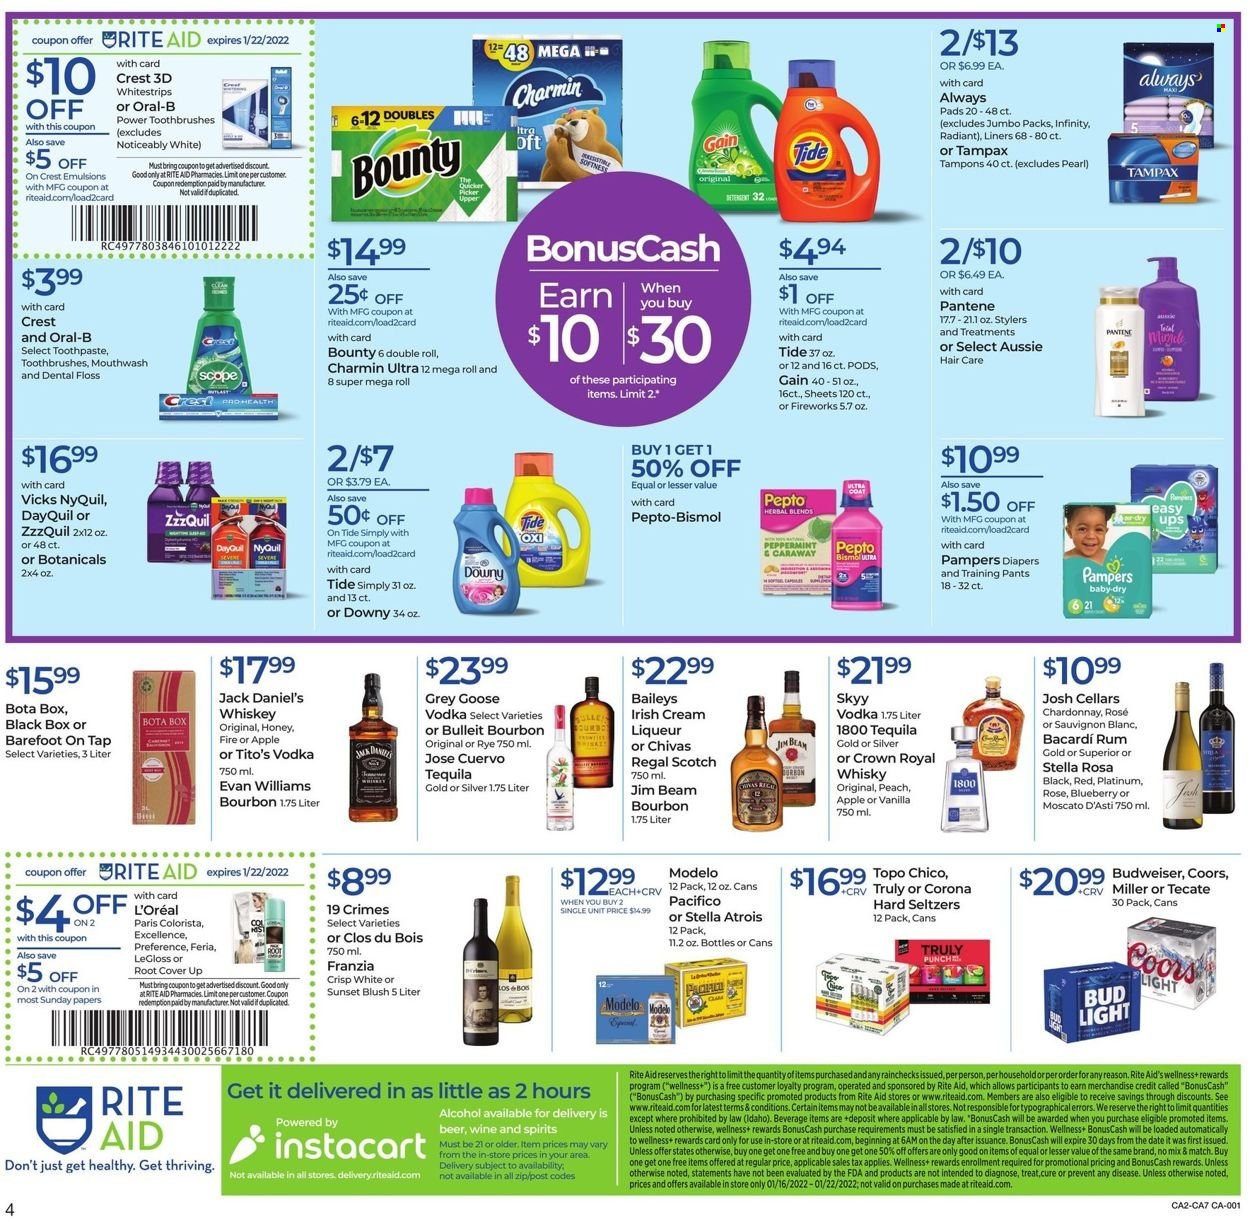 thumbnail - RITE AID Flyer - 01/16/2022 - 01/22/2022 - Sales products - Jack Daniel's, Bounty, honey, white wine, Chardonnay, wine, alcohol, Moscato, Sauvignon Blanc, rosé wine, Bacardi, bourbon, liqueur, rum, tequila, vodka, whiskey, irish cream, Baileys, SKYY, Chivas Regal, Jim Beam, TRULY, whisky, beer, Bud Light, Corona Extra, Miller, Modelo, Pampers, pants, nappies, baby pants, Charmin, Gain, Tide, Oral-B, toothpaste, mouthwash, Crest, Tampax, Always pads, tampons, L’Oréal, Infinity, Aussie, Pantene, Brite, Vicks, DayQuil, ZzzQuil, Pepto-bismol, NyQuil, Budweiser, Coors. Page 4.